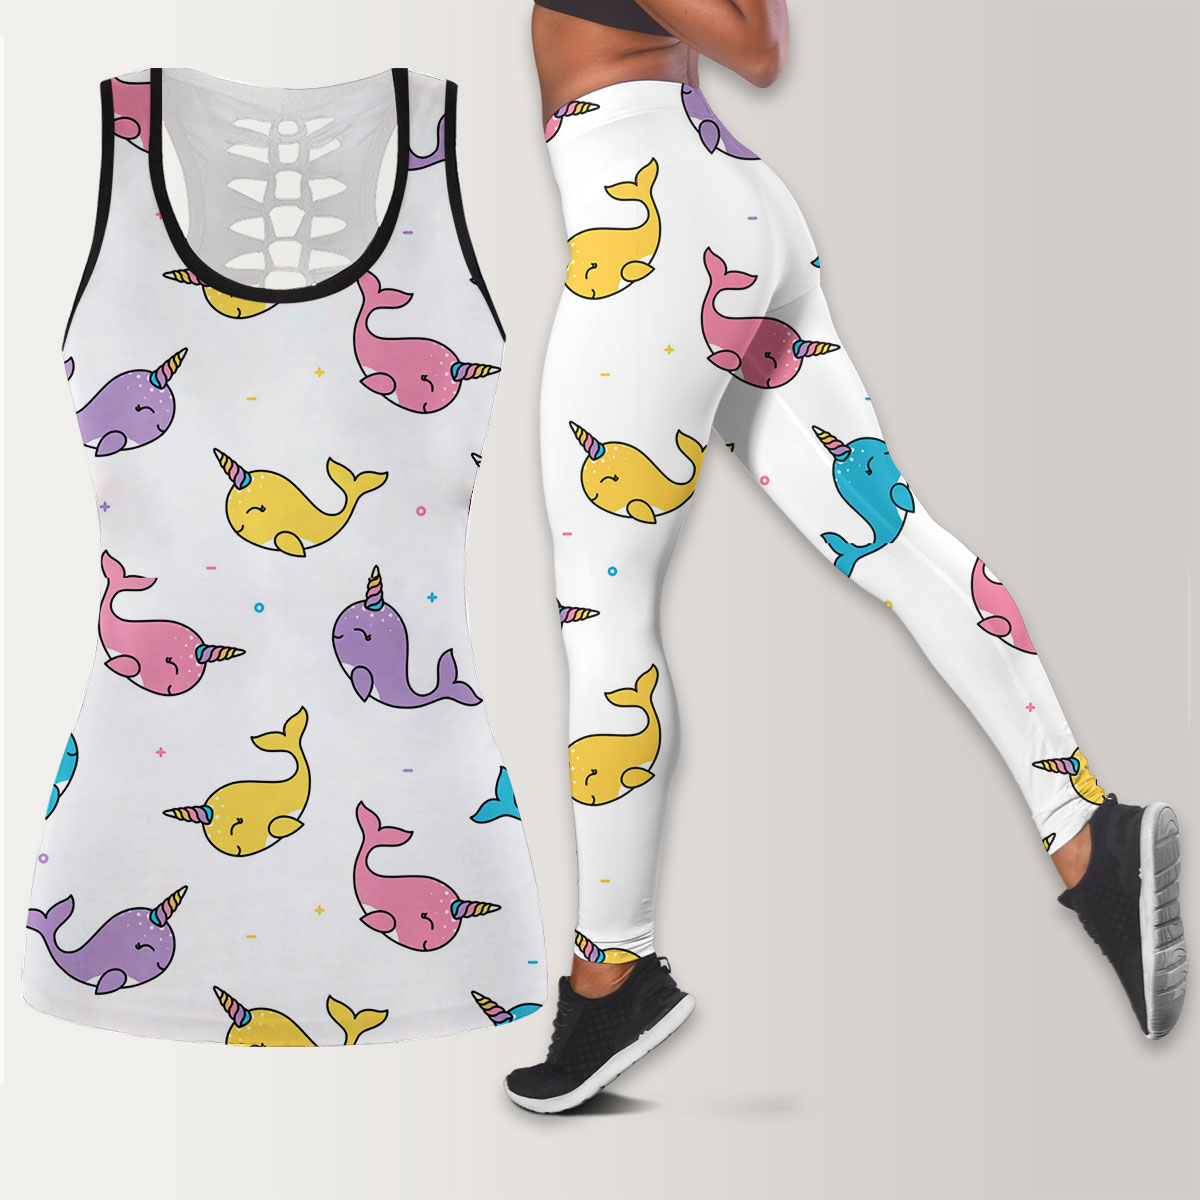 Colorful Happy Narwhal Legging Tank Top set